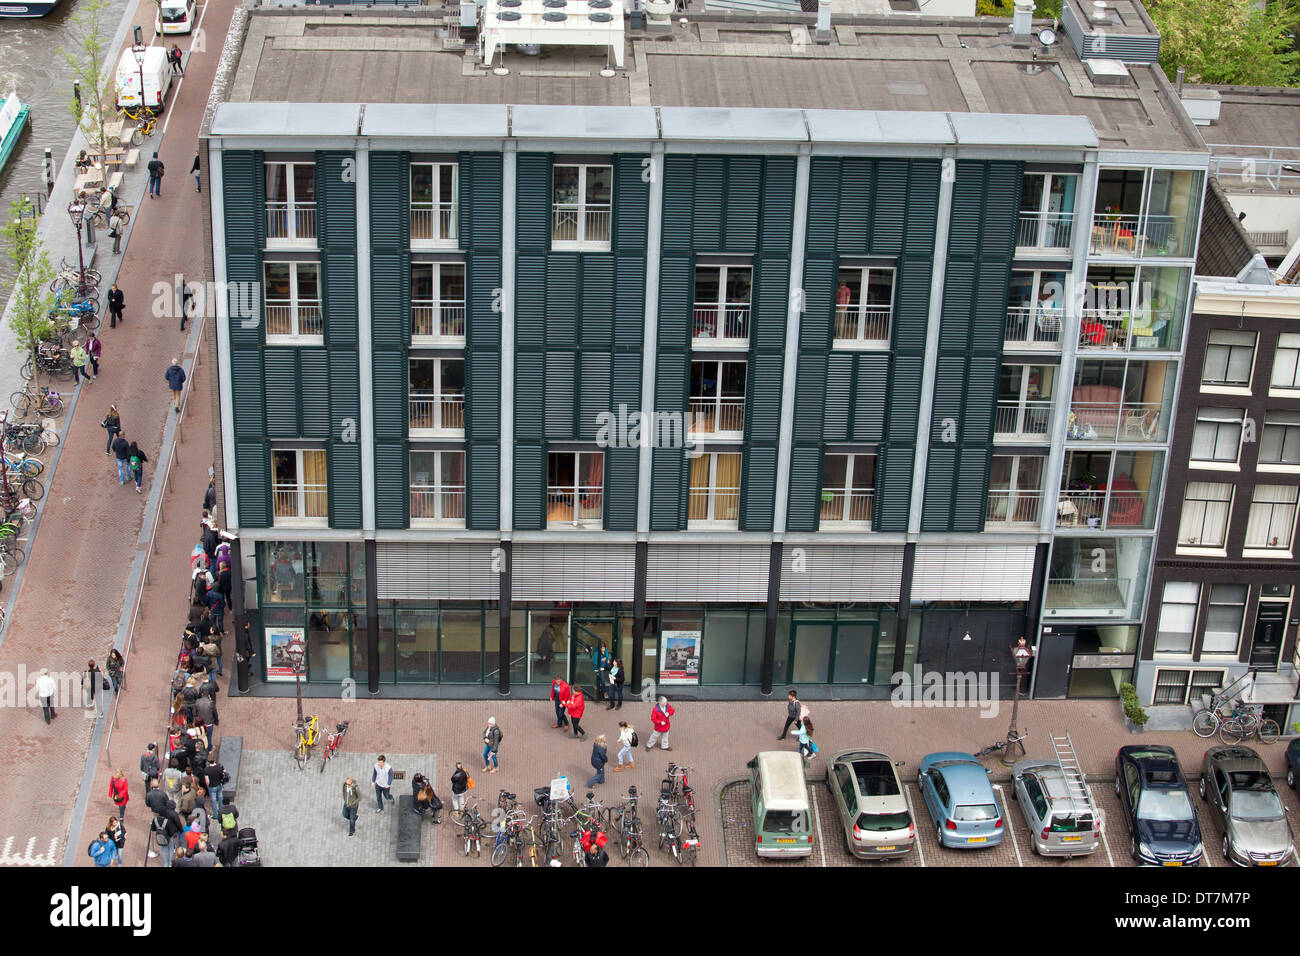 People queuing to the Anne Frank House museum on Prinsengracht, Holland, Netherlands. Stock Photo